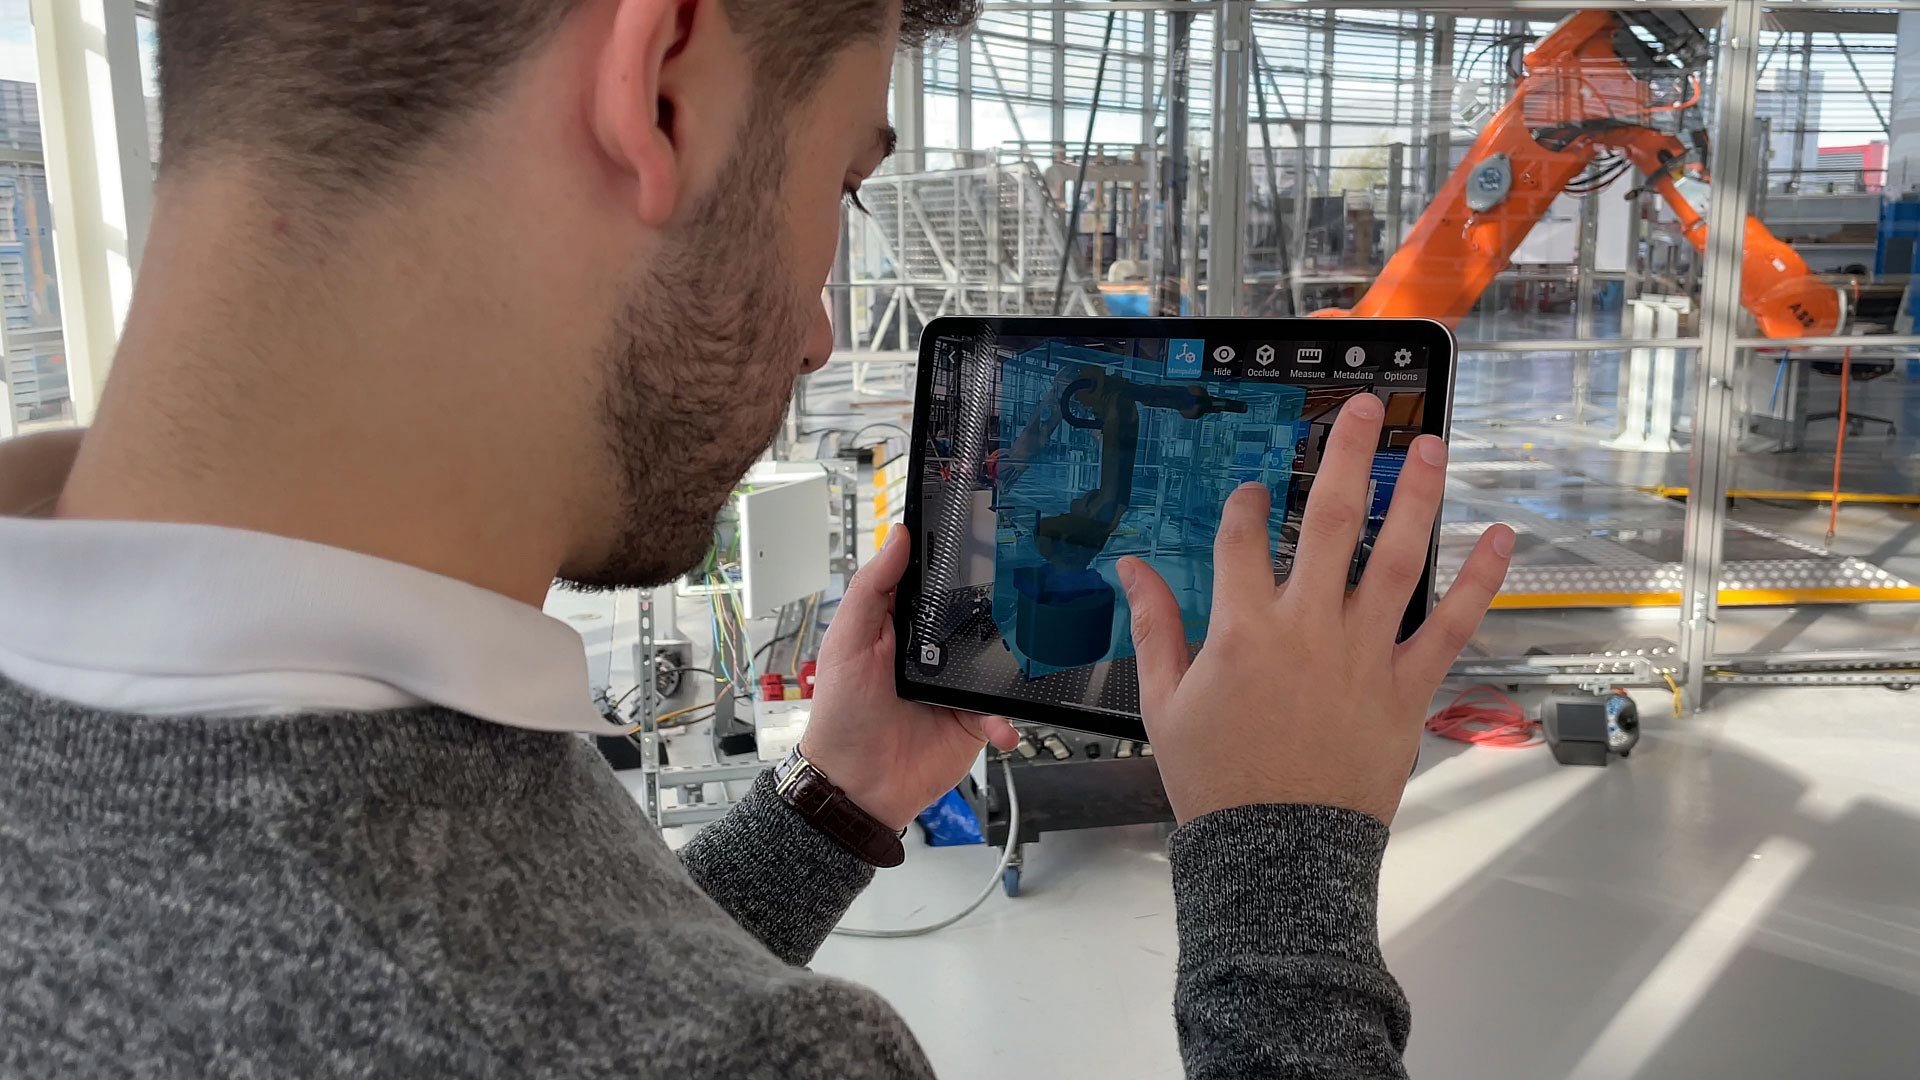 Augmented Reality in an engineering environment